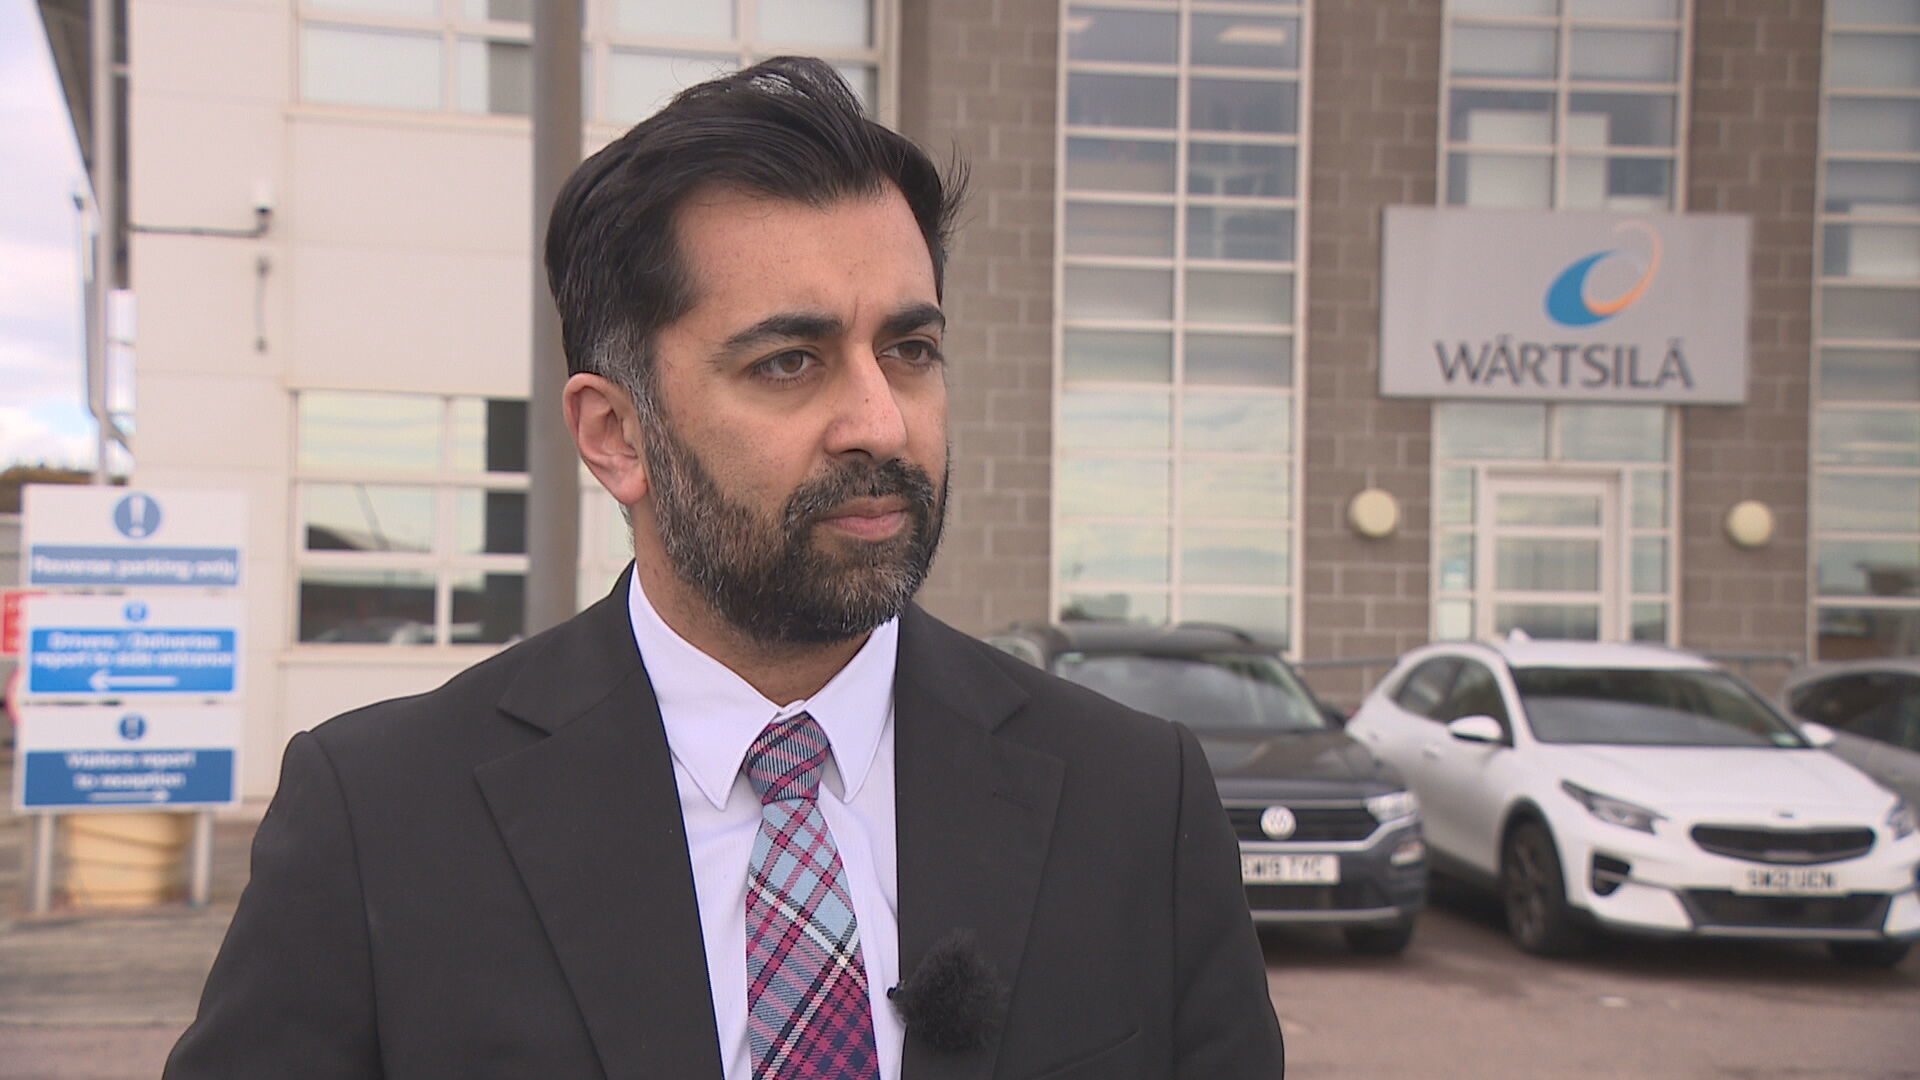 Humza Yousaf has been vocal in his support for the Greens.